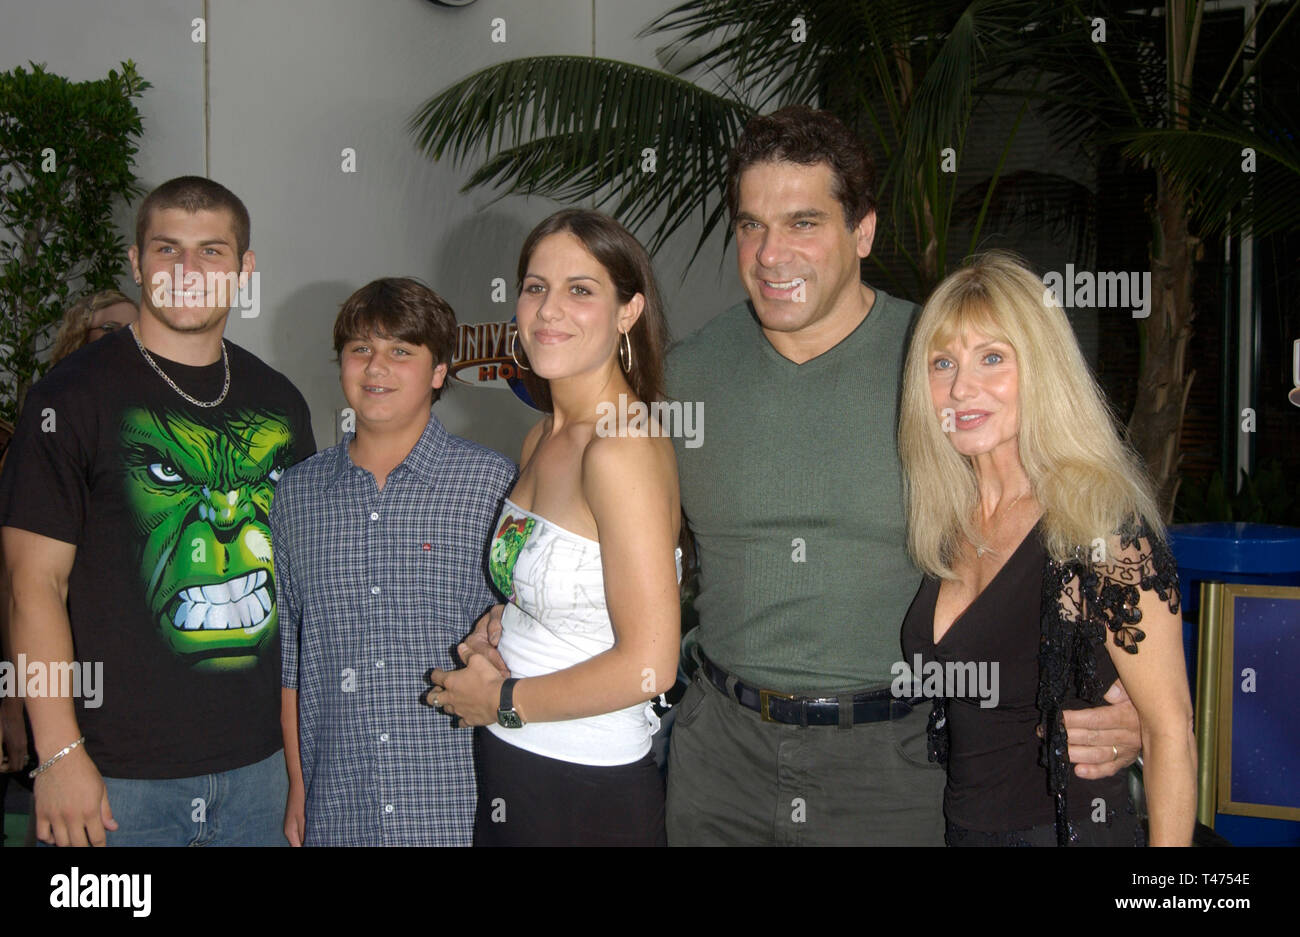 LOS ANGELES, CA. June 17, 2003: Actor LOU FERRIGNO & wife CARLA & family at world premiere of his new movie The Hulk at Universal Studios Hollywood. Stock Photo